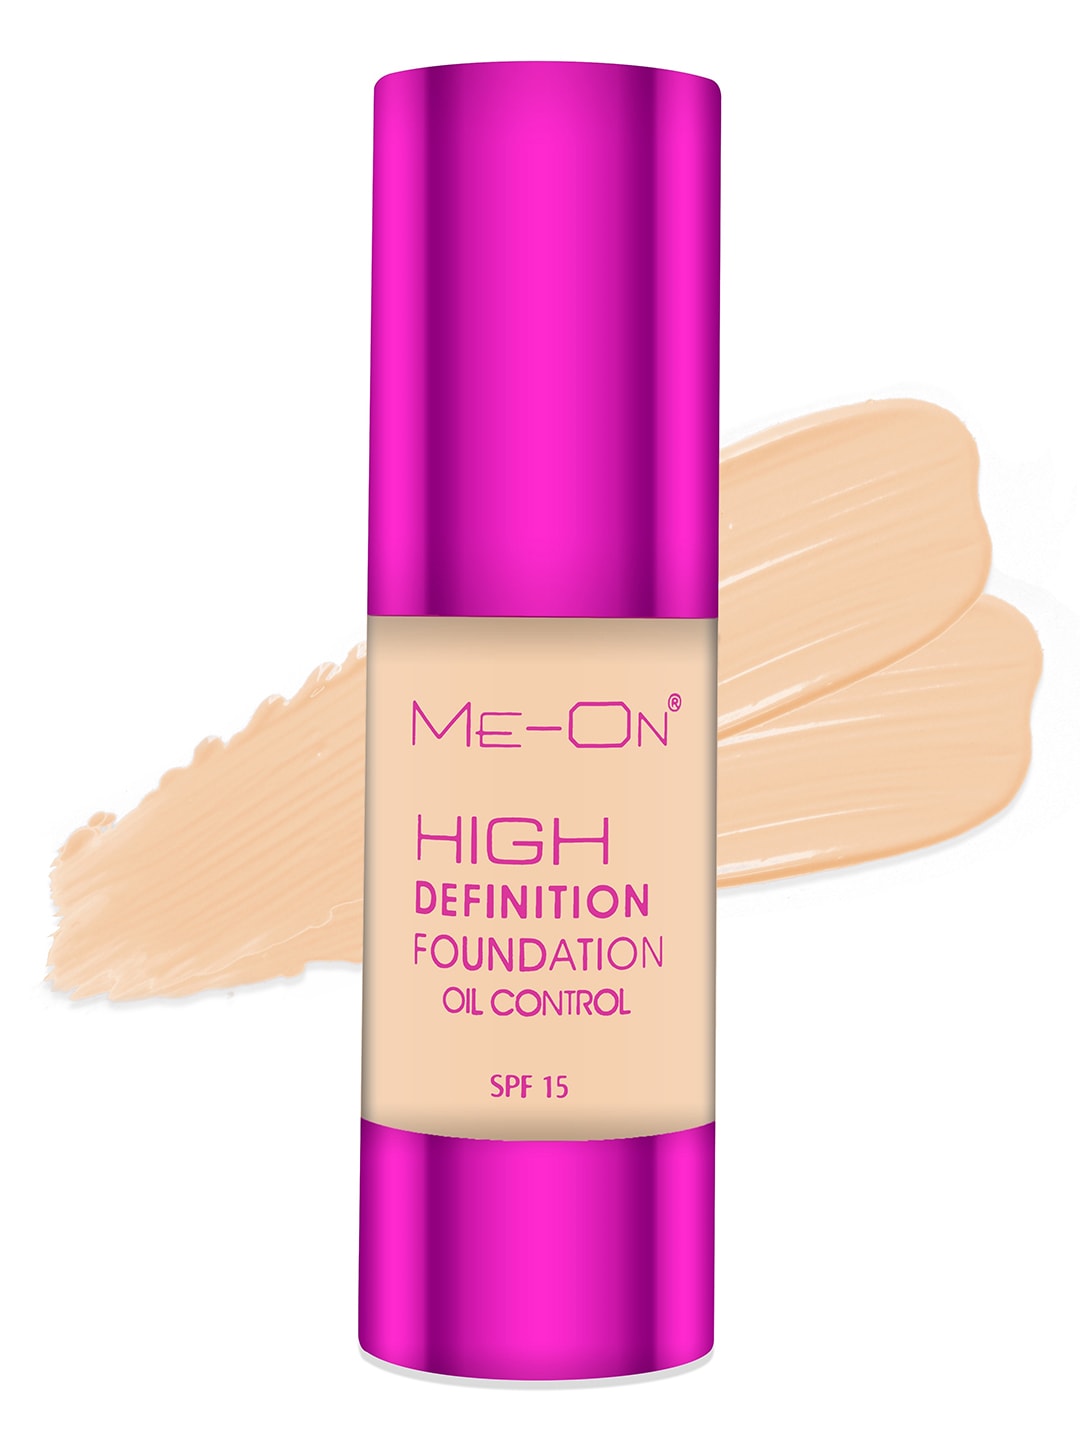 ME-ON High Definition Oil Control SPF15 Foundation - Shade 01 Price in India